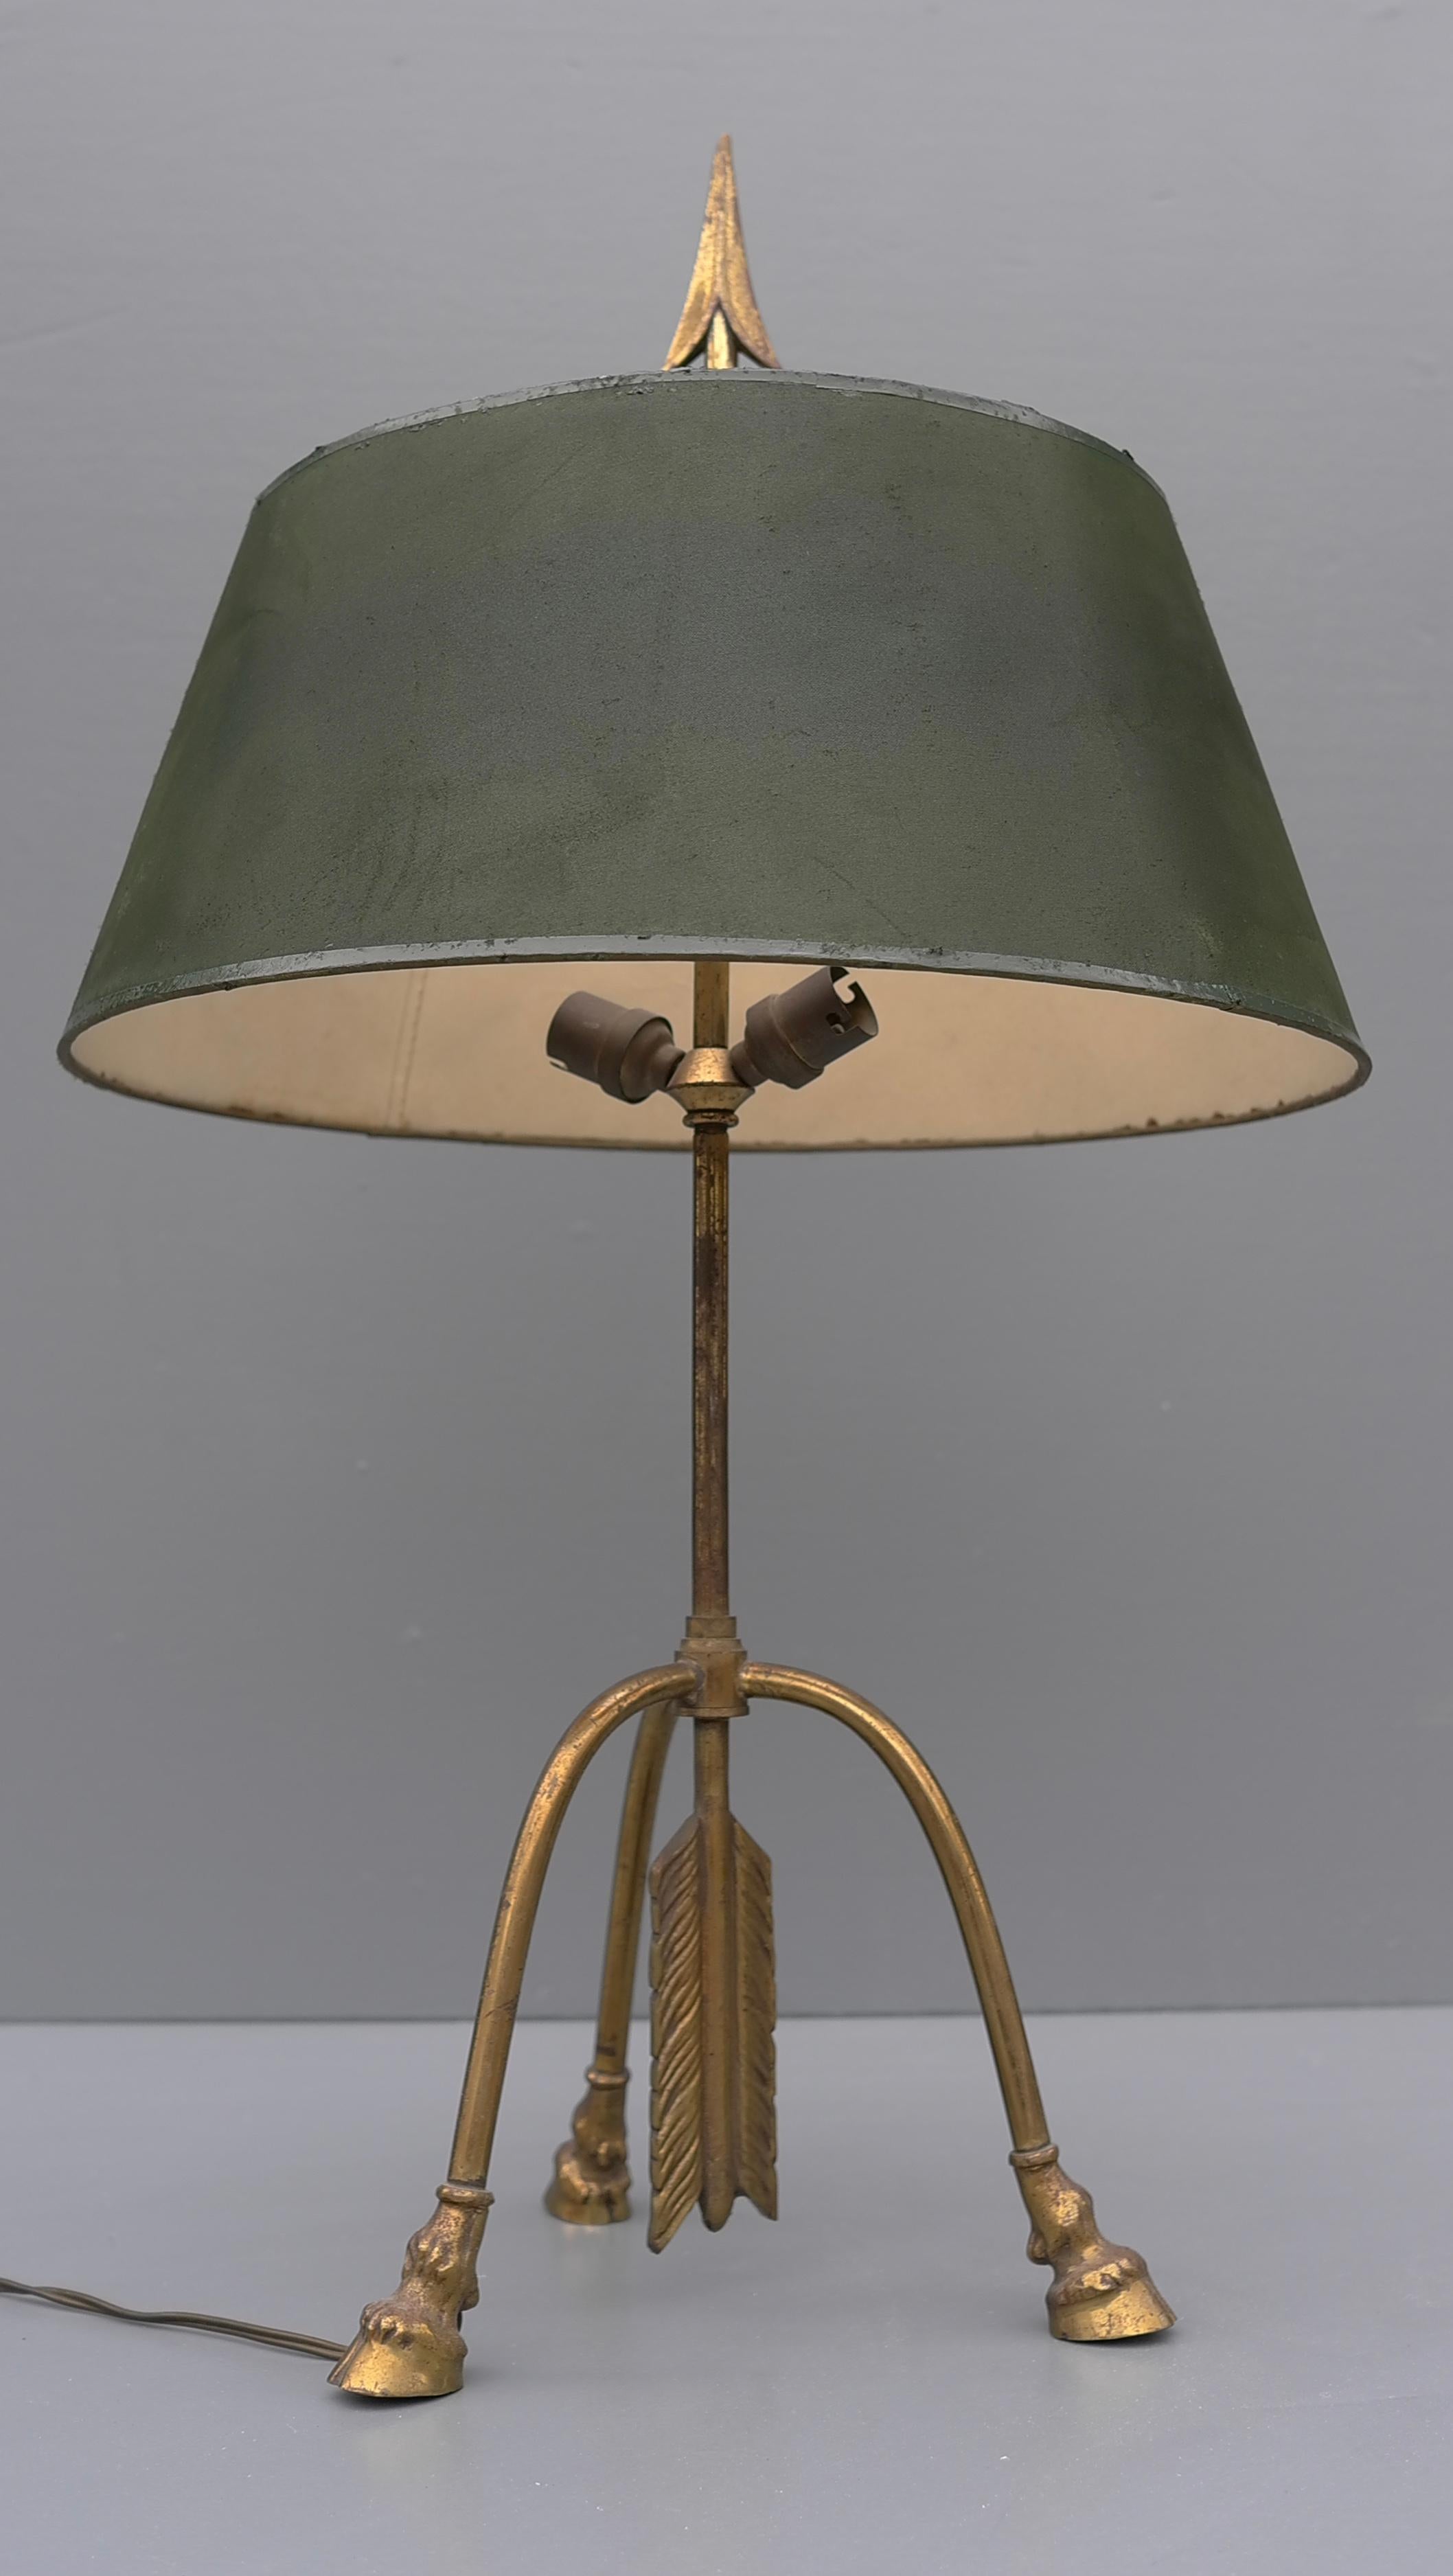 Maison Jansen 'Centaur' Hooves and Arrow Brass table lamp, France 1940's.

The hood can position in different heights.